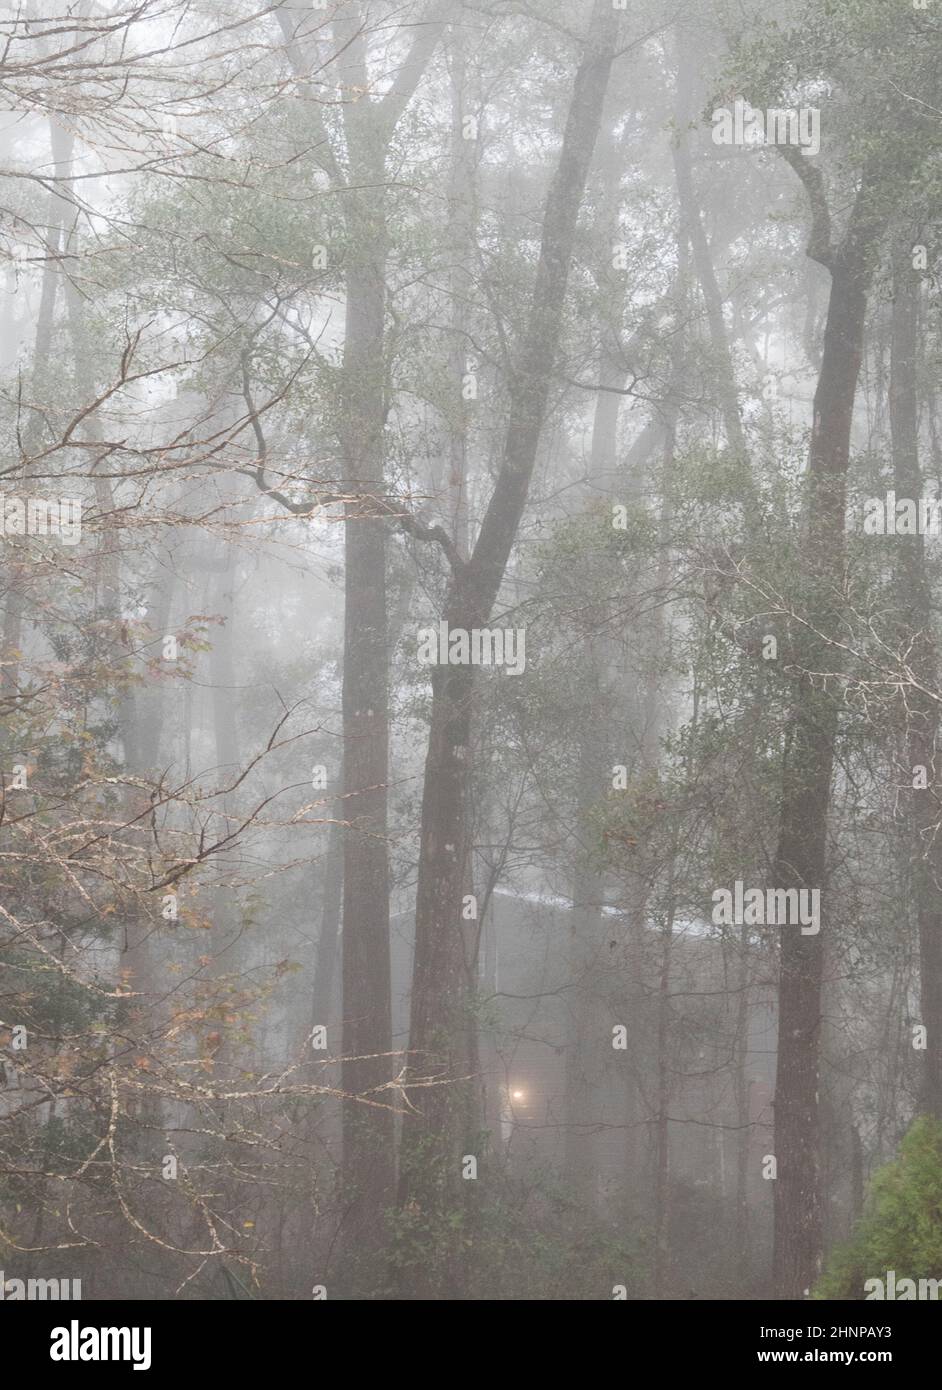 Dense Fog Advisory in effect for North Central Florida. Stock Photo